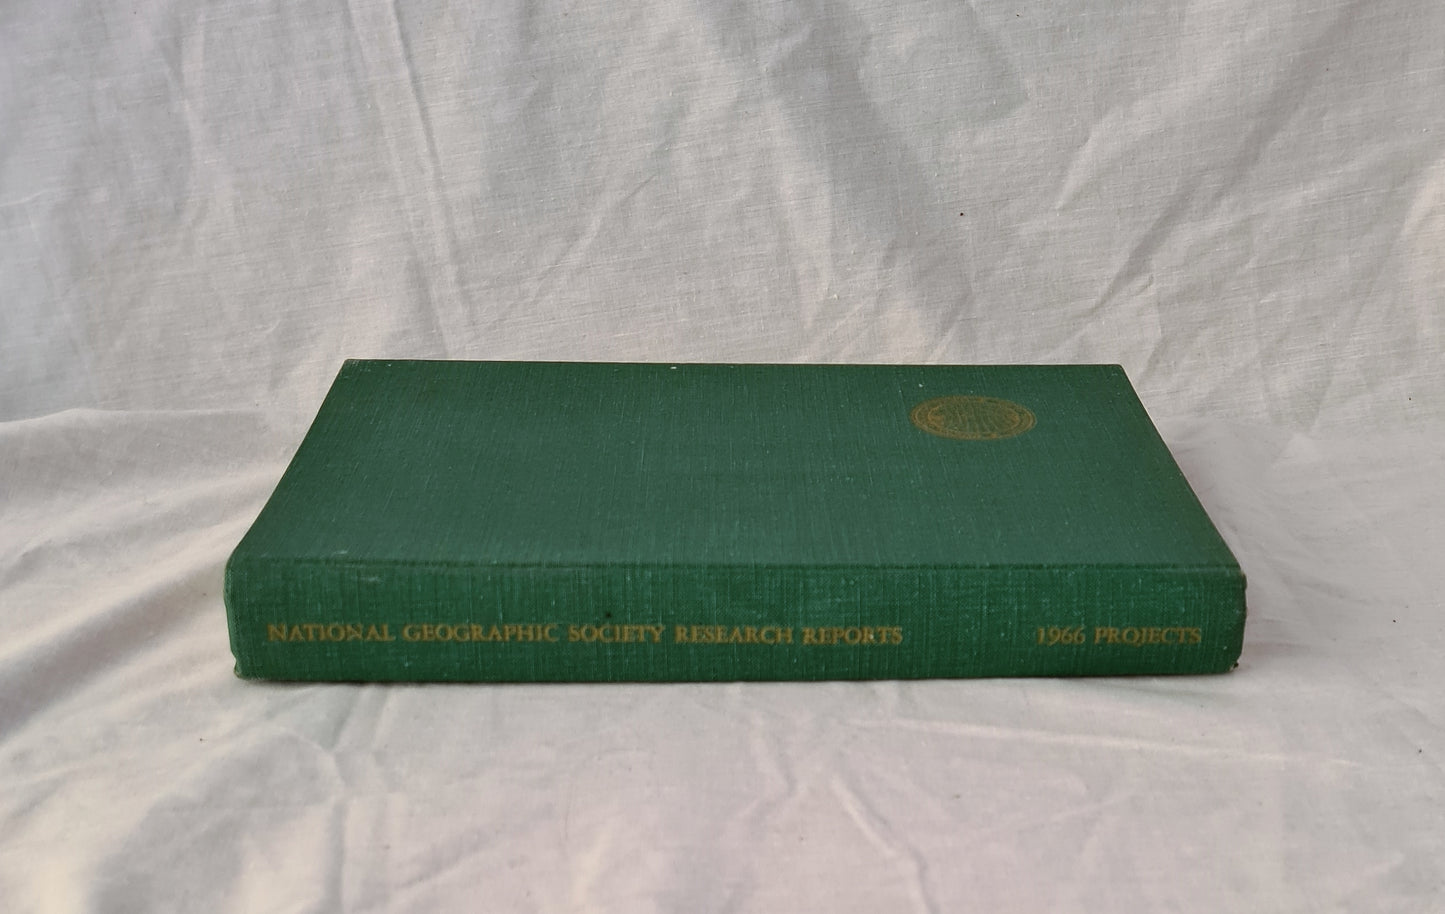 National Geographic Society Research Reports by Paul H. Oehser